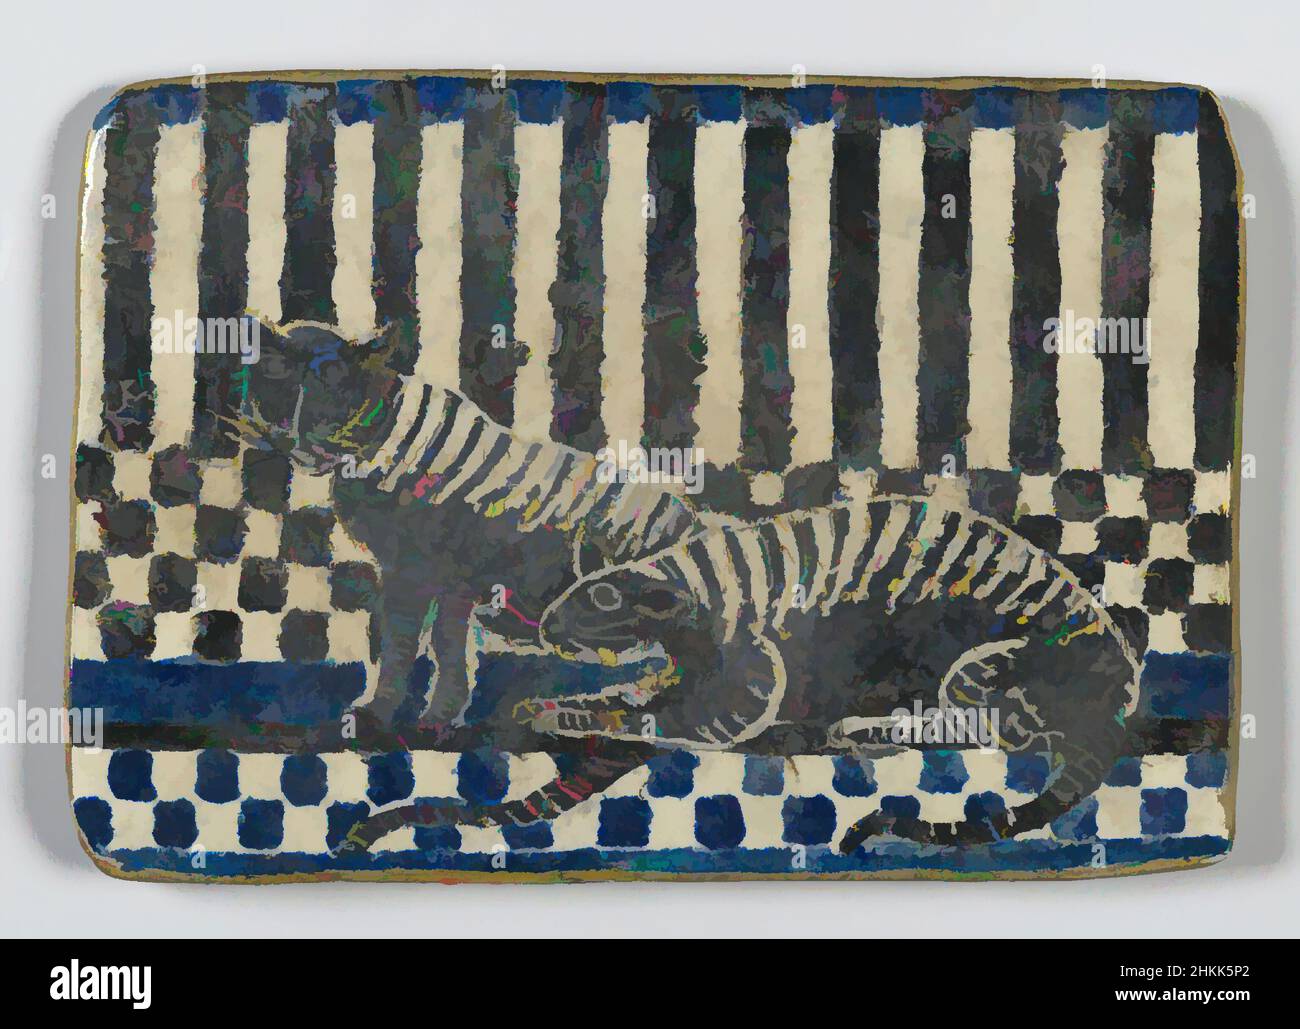 Art inspired by Tile, Glazed earthenware, United States, 19th century, 5 7/8 x 4 in., 14.9 x 10.2 cm, 19th century animal art, animals, black, black cat, blue, blue and white, caged, cat, cats, checker, earthenware, glazed, Glazed tile with animals, stripped, tigers, Tile, Classic works modernized by Artotop with a splash of modernity. Shapes, color and value, eye-catching visual impact on art. Emotions through freedom of artworks in a contemporary way. A timeless message pursuing a wildly creative new direction. Artists turning to the digital medium and creating the Artotop NFT Stock Photo